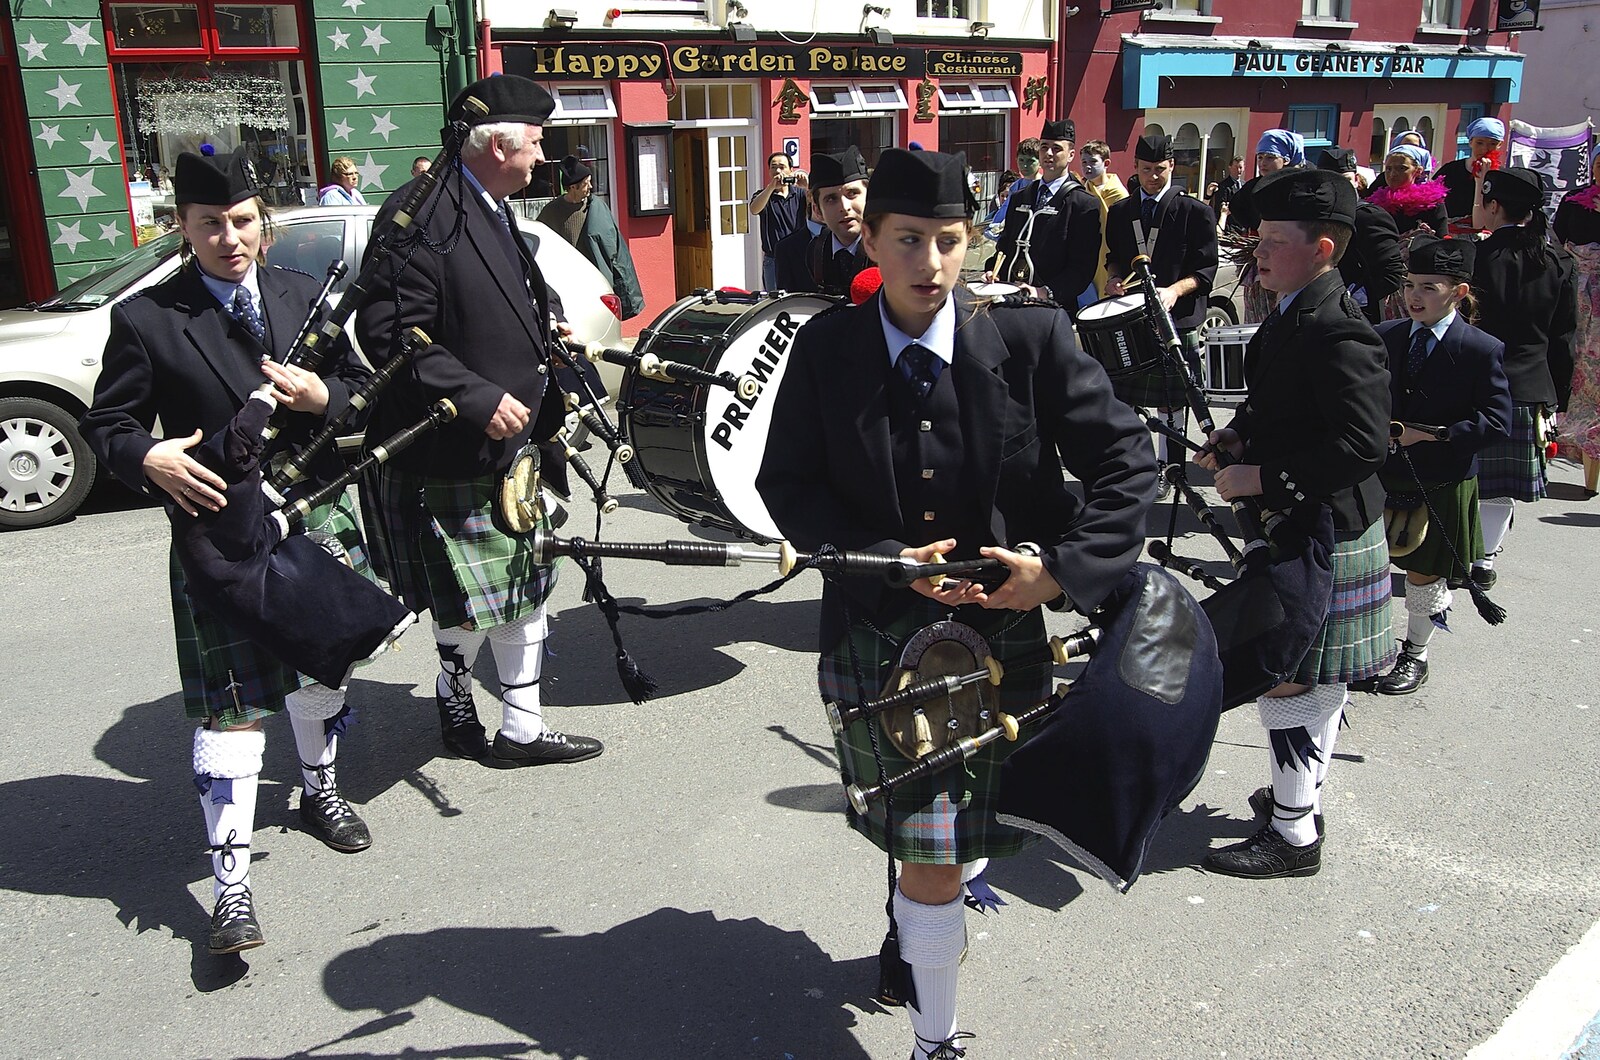 Connor Pass, Slea Head and Dingle, County Kerry, Ireland - 4th May 2008: A bagpipe band